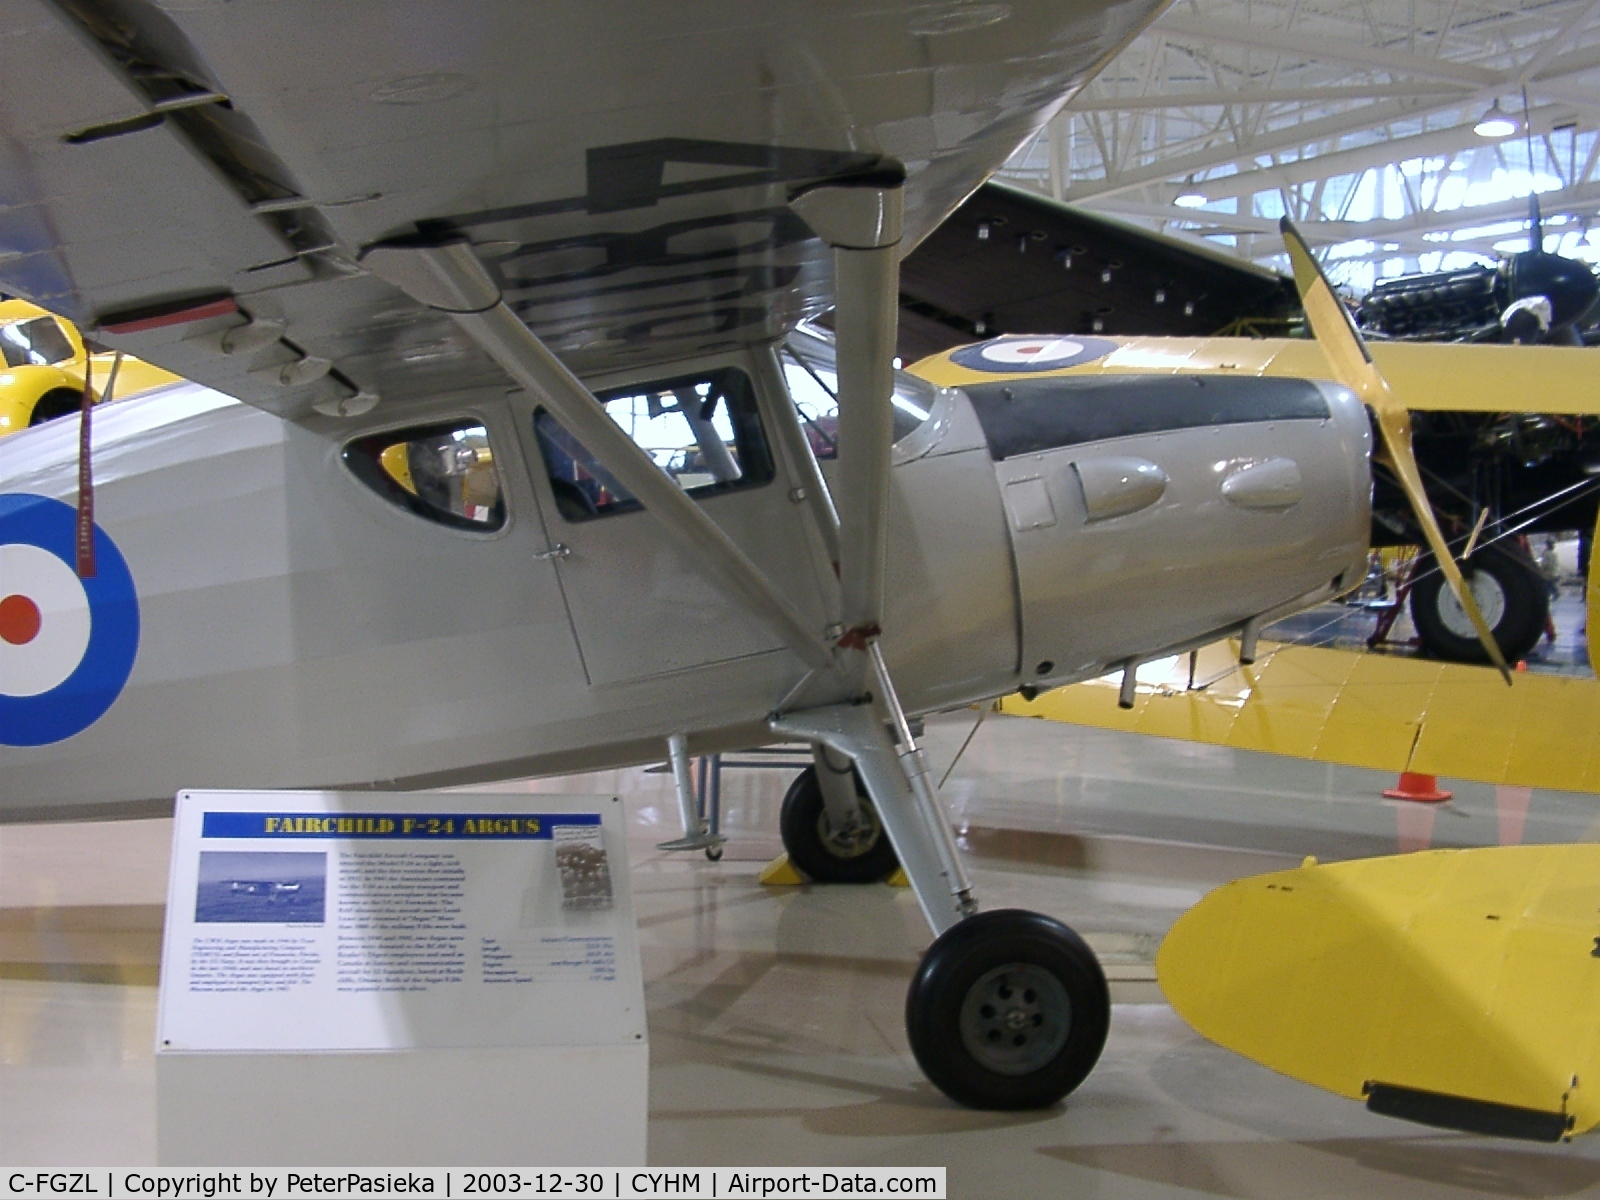 C-FGZL, 1946 Fairchild 24R-46 C/N R46-250, Canadian Warplane Heritage Museum is located at the Hamilton Airport, Ontario Canada